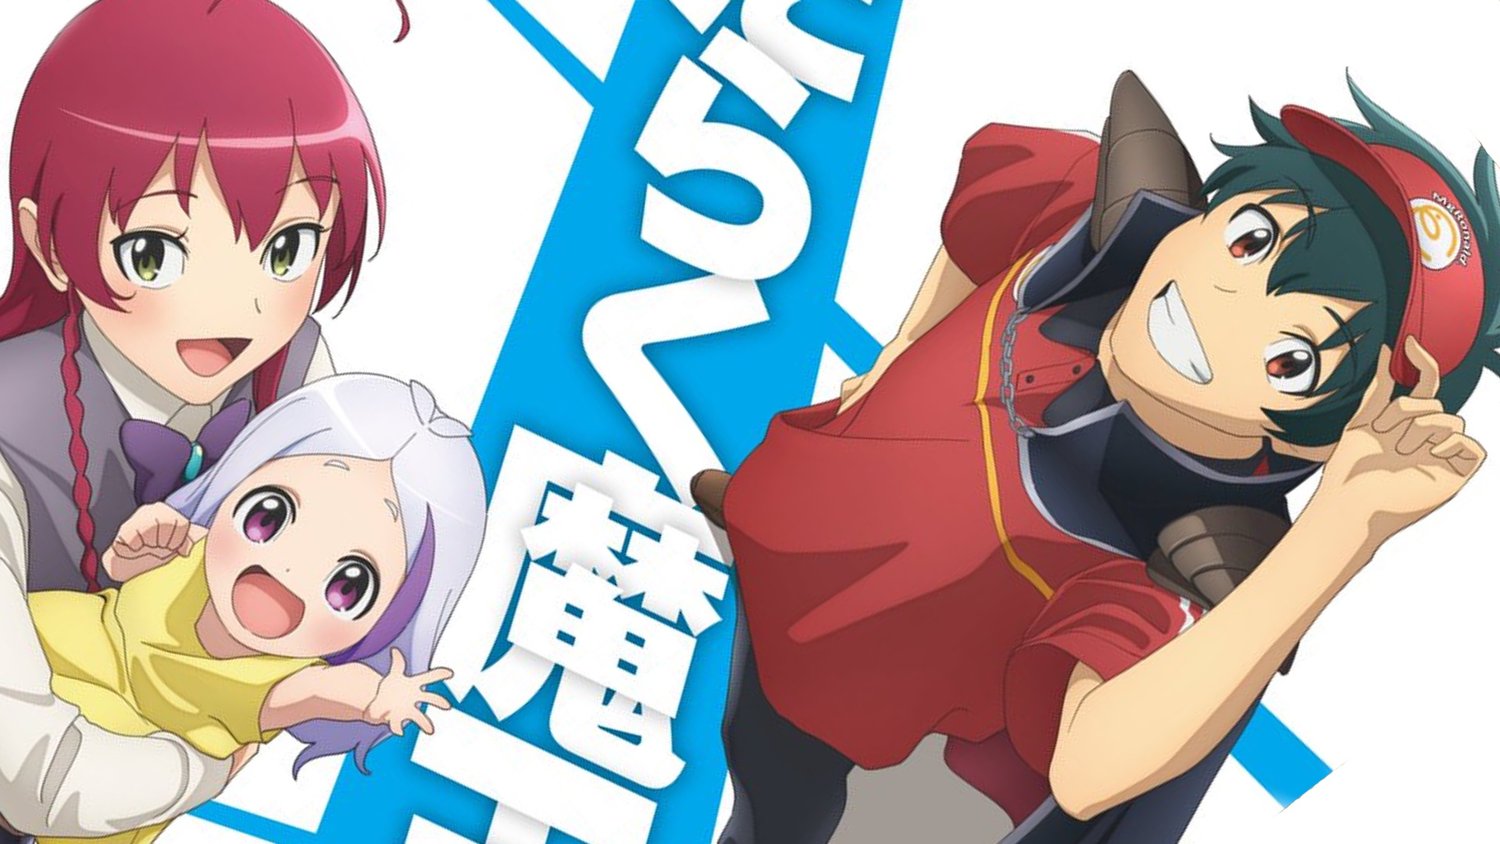 The Devil Is a Part-Timer!! (TV 3) - Anime News Network